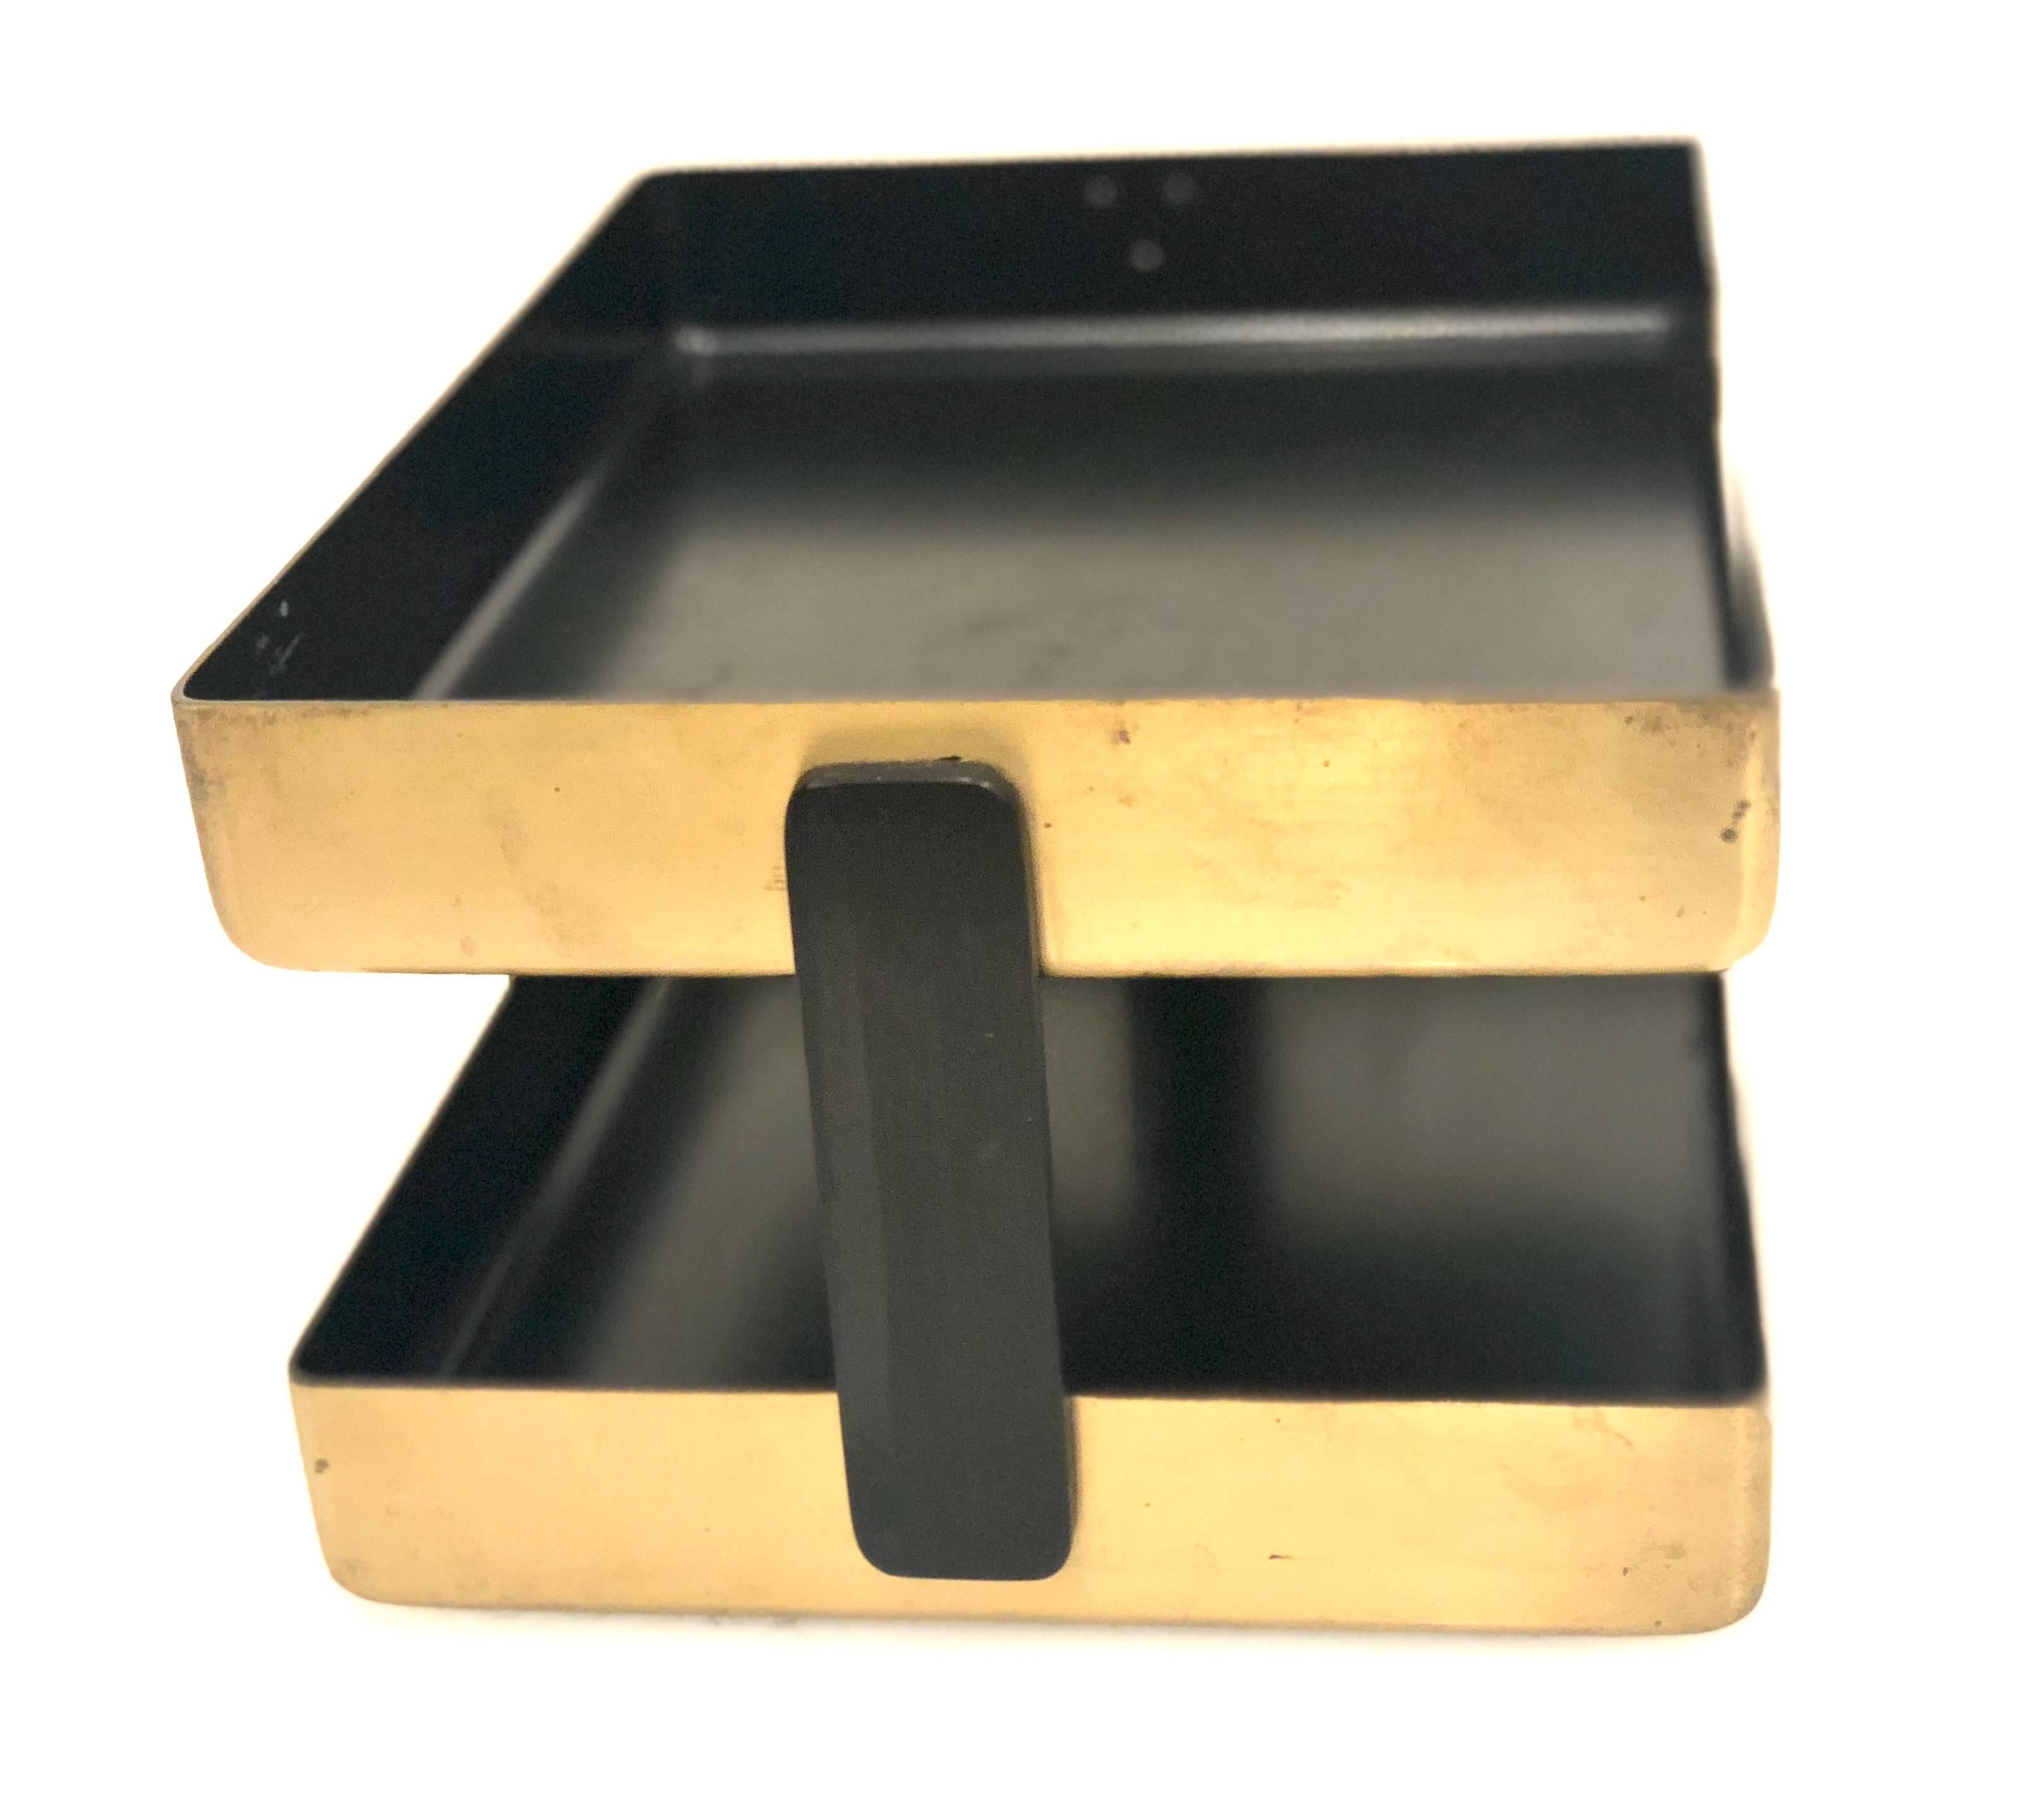 Double letter tray in brushed brass finish with black enamel lining by Metcor. Very nice accent to any executives desk! California design.